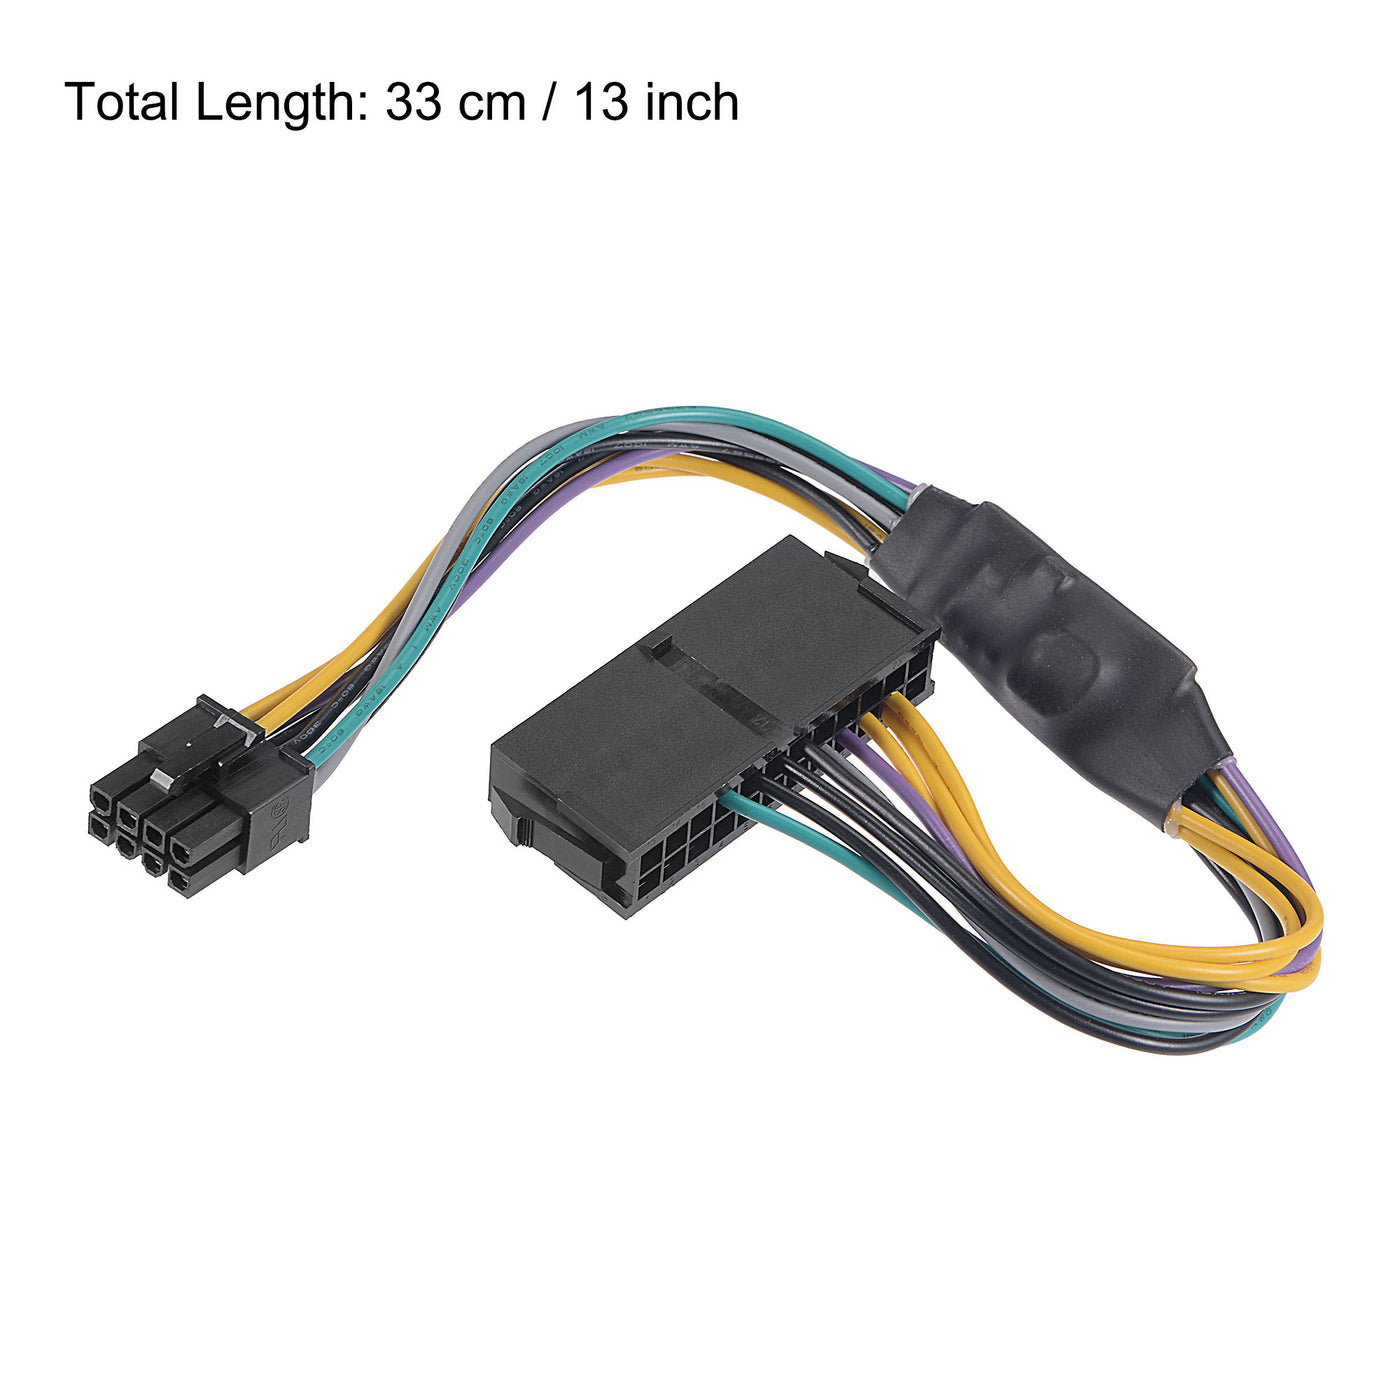 uxcell Uxcell 24 to 8 Pin Mainboard Power Cable for Modular Board 18 AWG 33cm